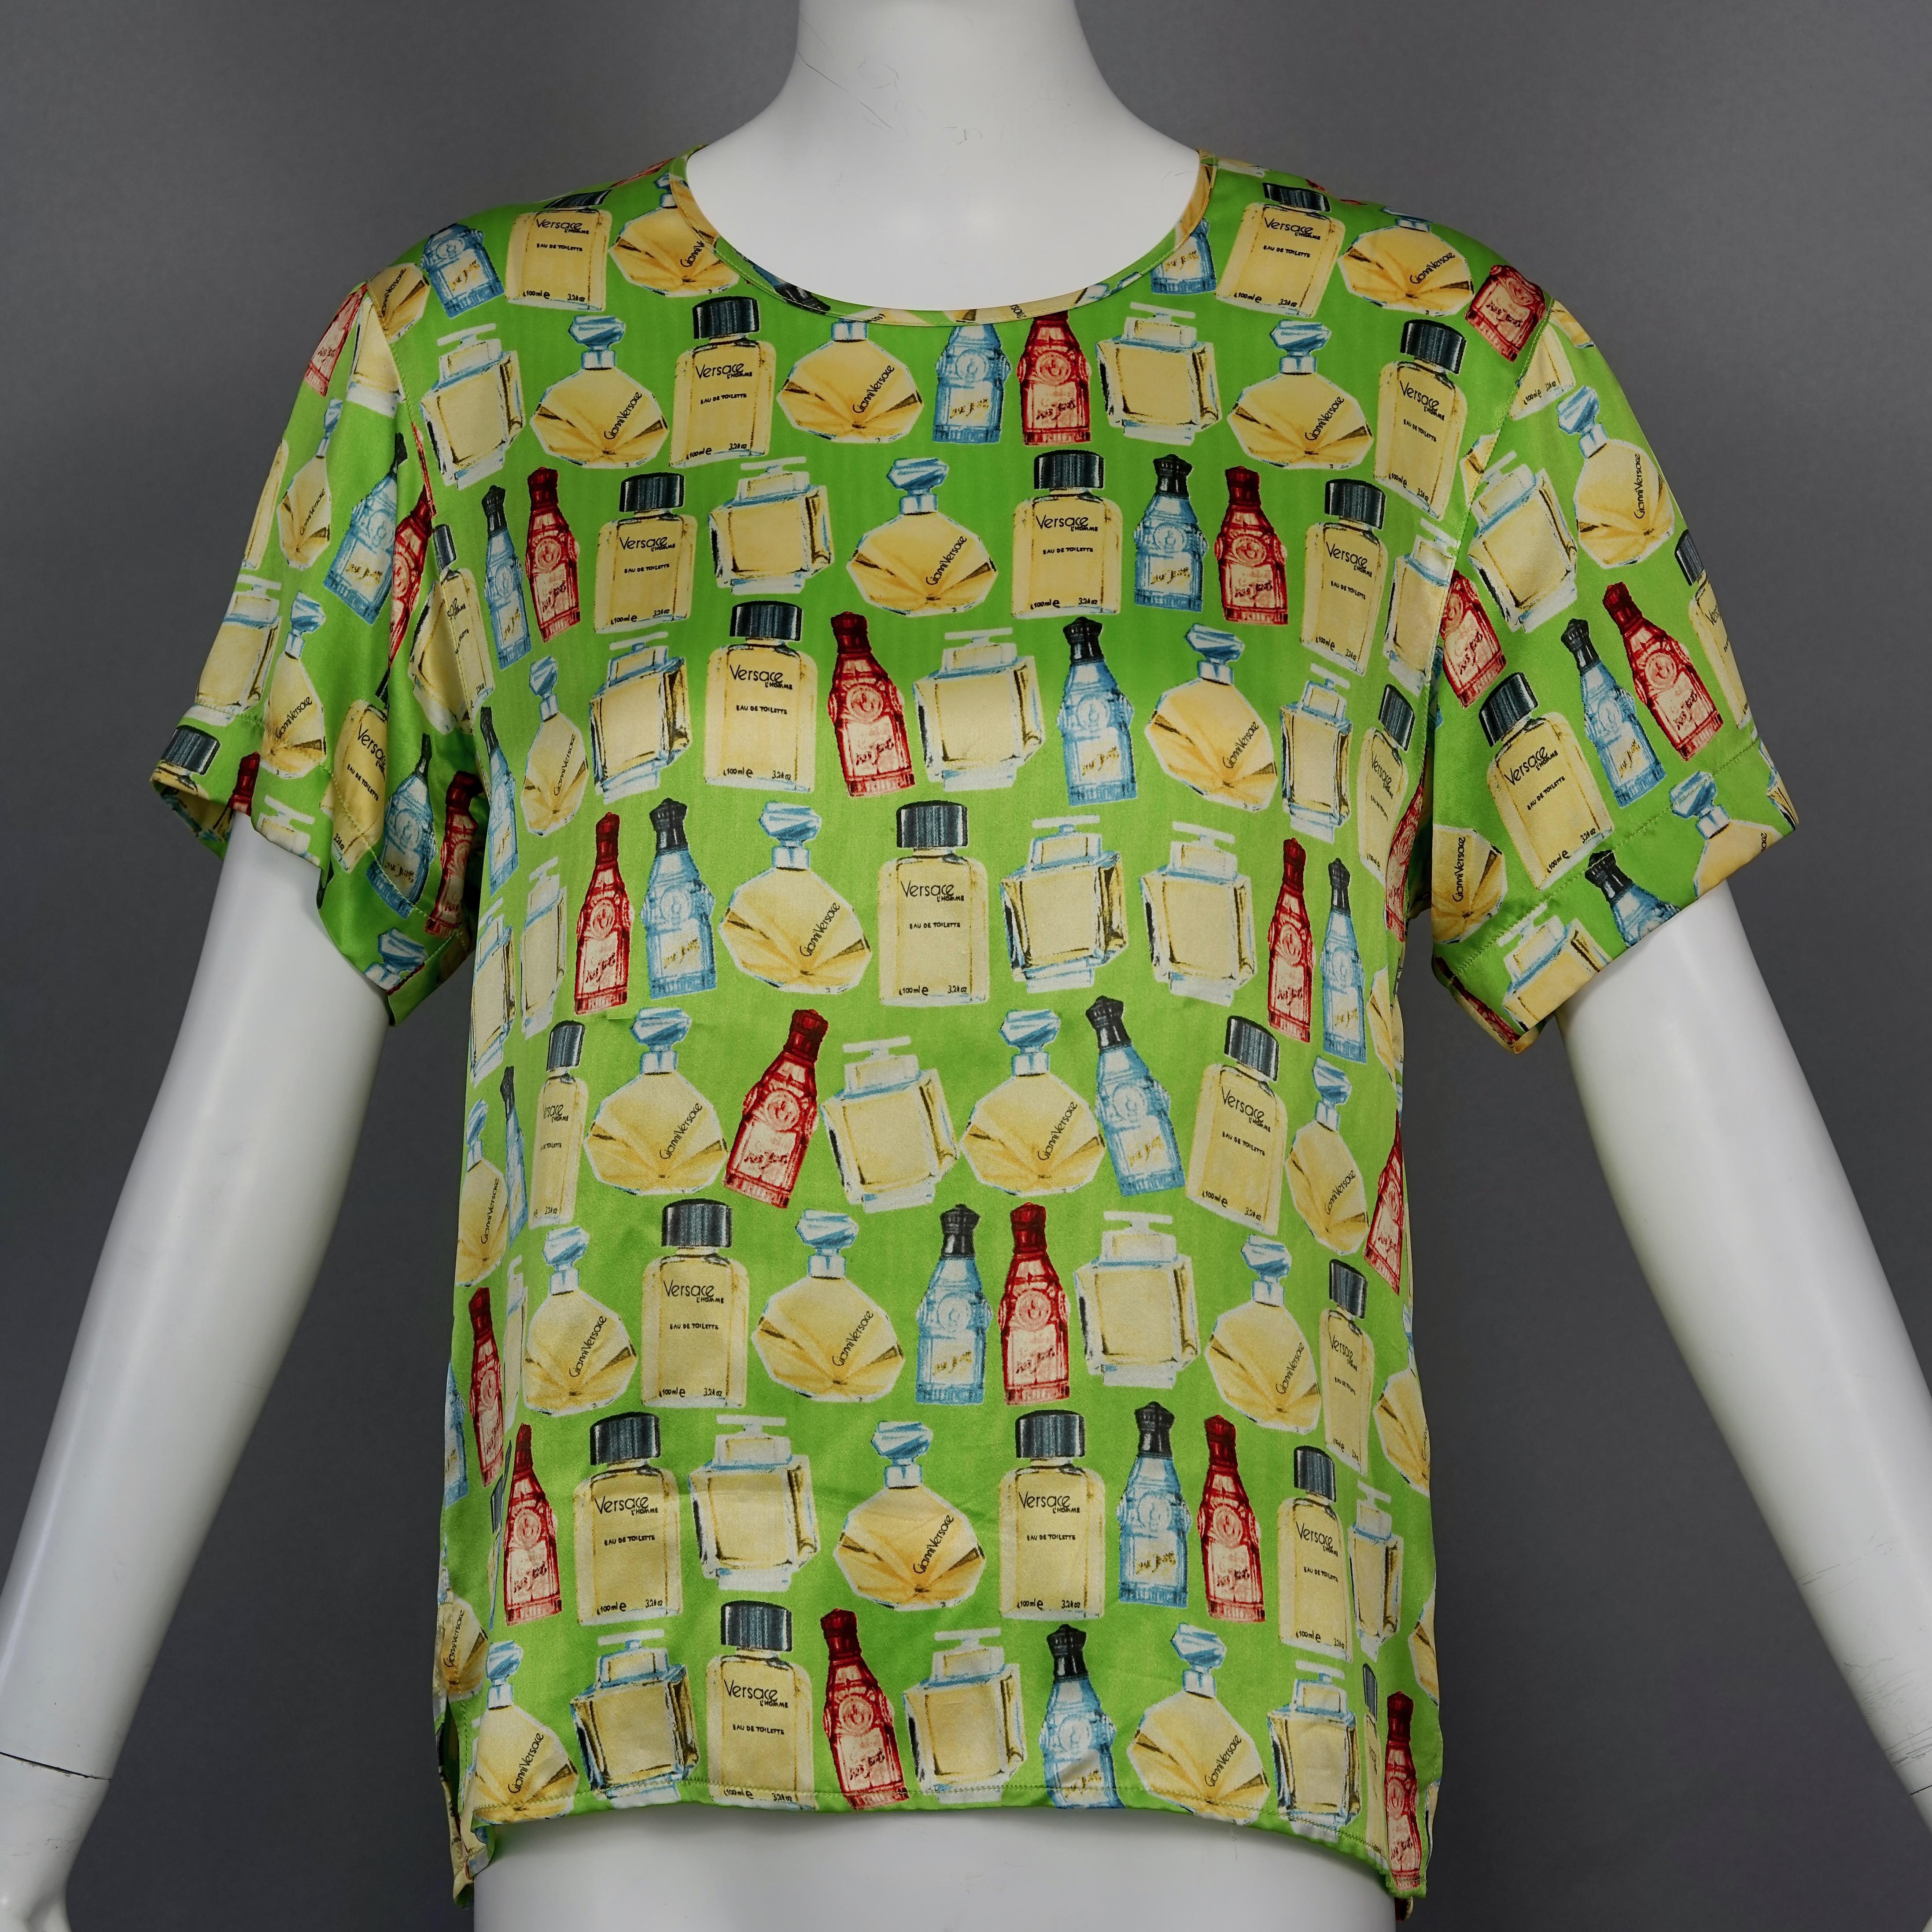 Vintage VERSACE Silk Perfume Print Green Novelty Blouse Top

Measurements taken laid flat:
Shoulders: 16.92 inches (43 cm)
Sleeves: 7.87 inches (20 cm)
Bust: 18.89 inches (48 cm)
Waist: 18.50 inches  (47 cm)
Length: 24.40 inches (62 cm)

Features:
-